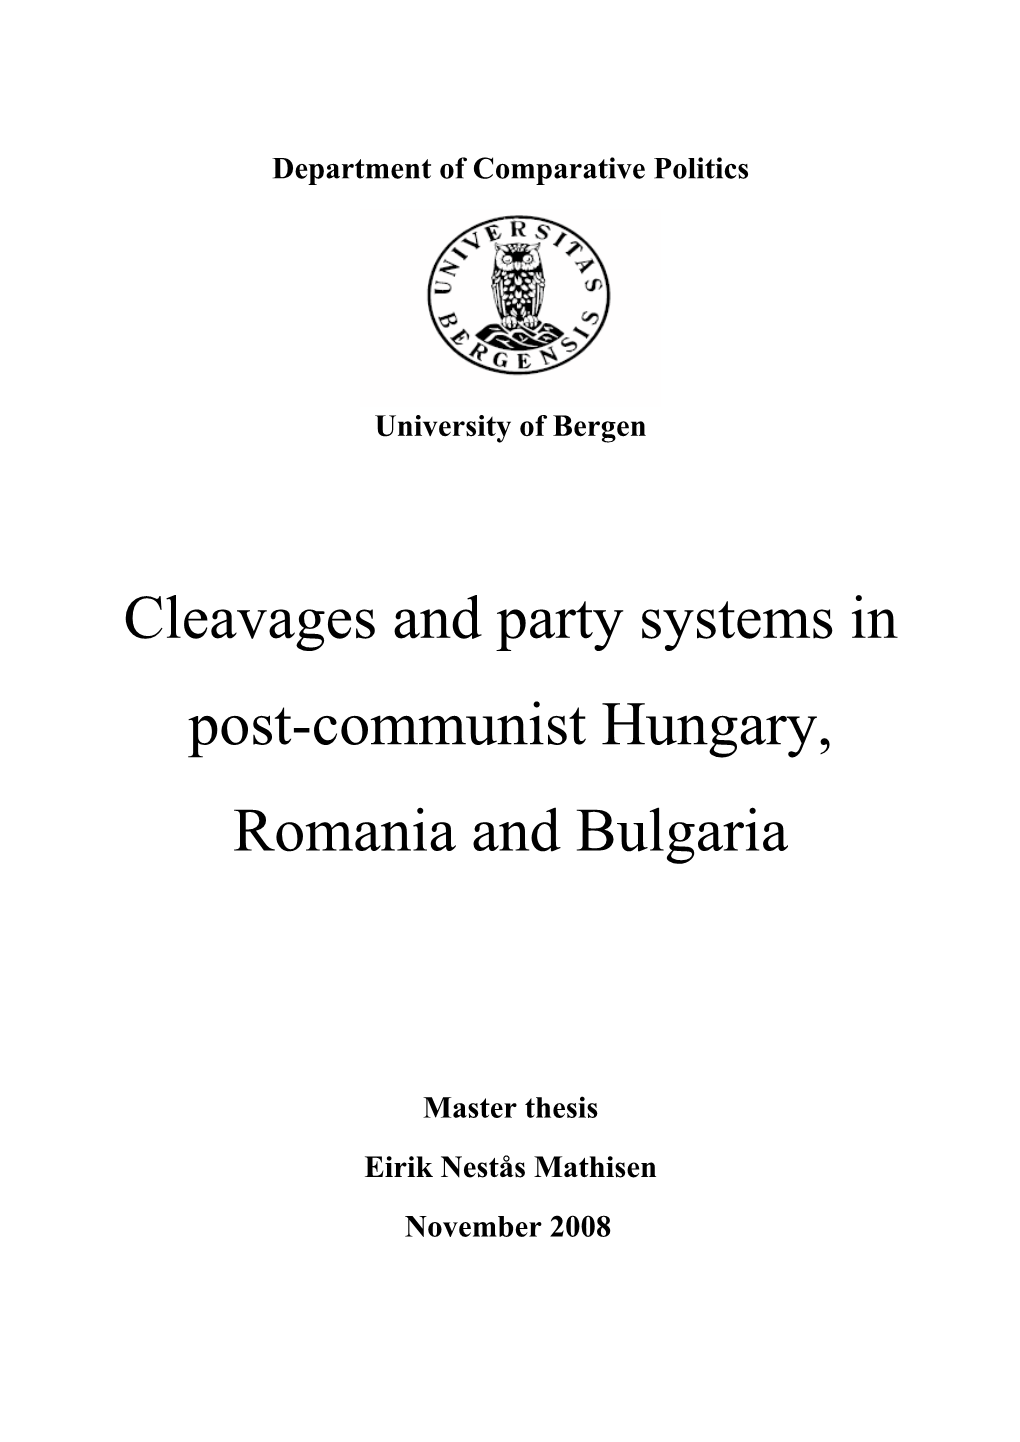 Cleavages and Party Systems in Post-Communist Hungary, Romania and Bulgaria